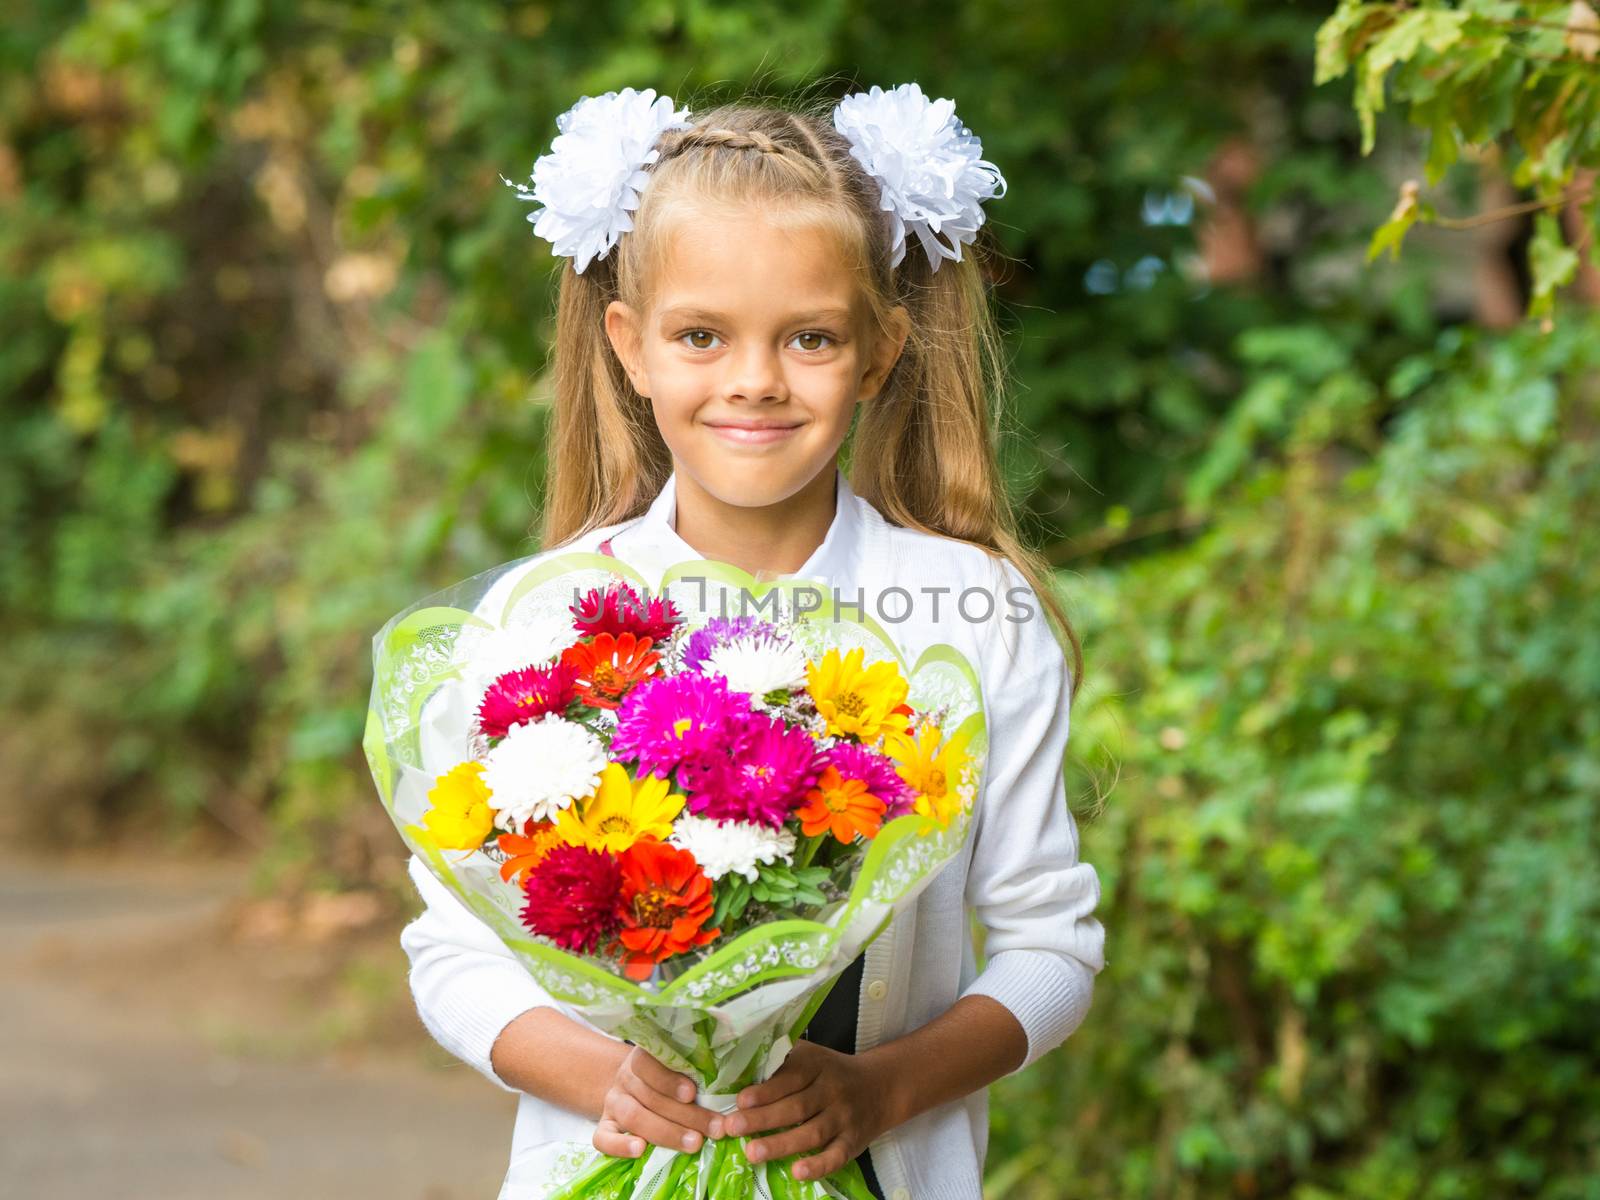 Up portrait of a seven-year school girl with a bouquet of flowers by Madhourse